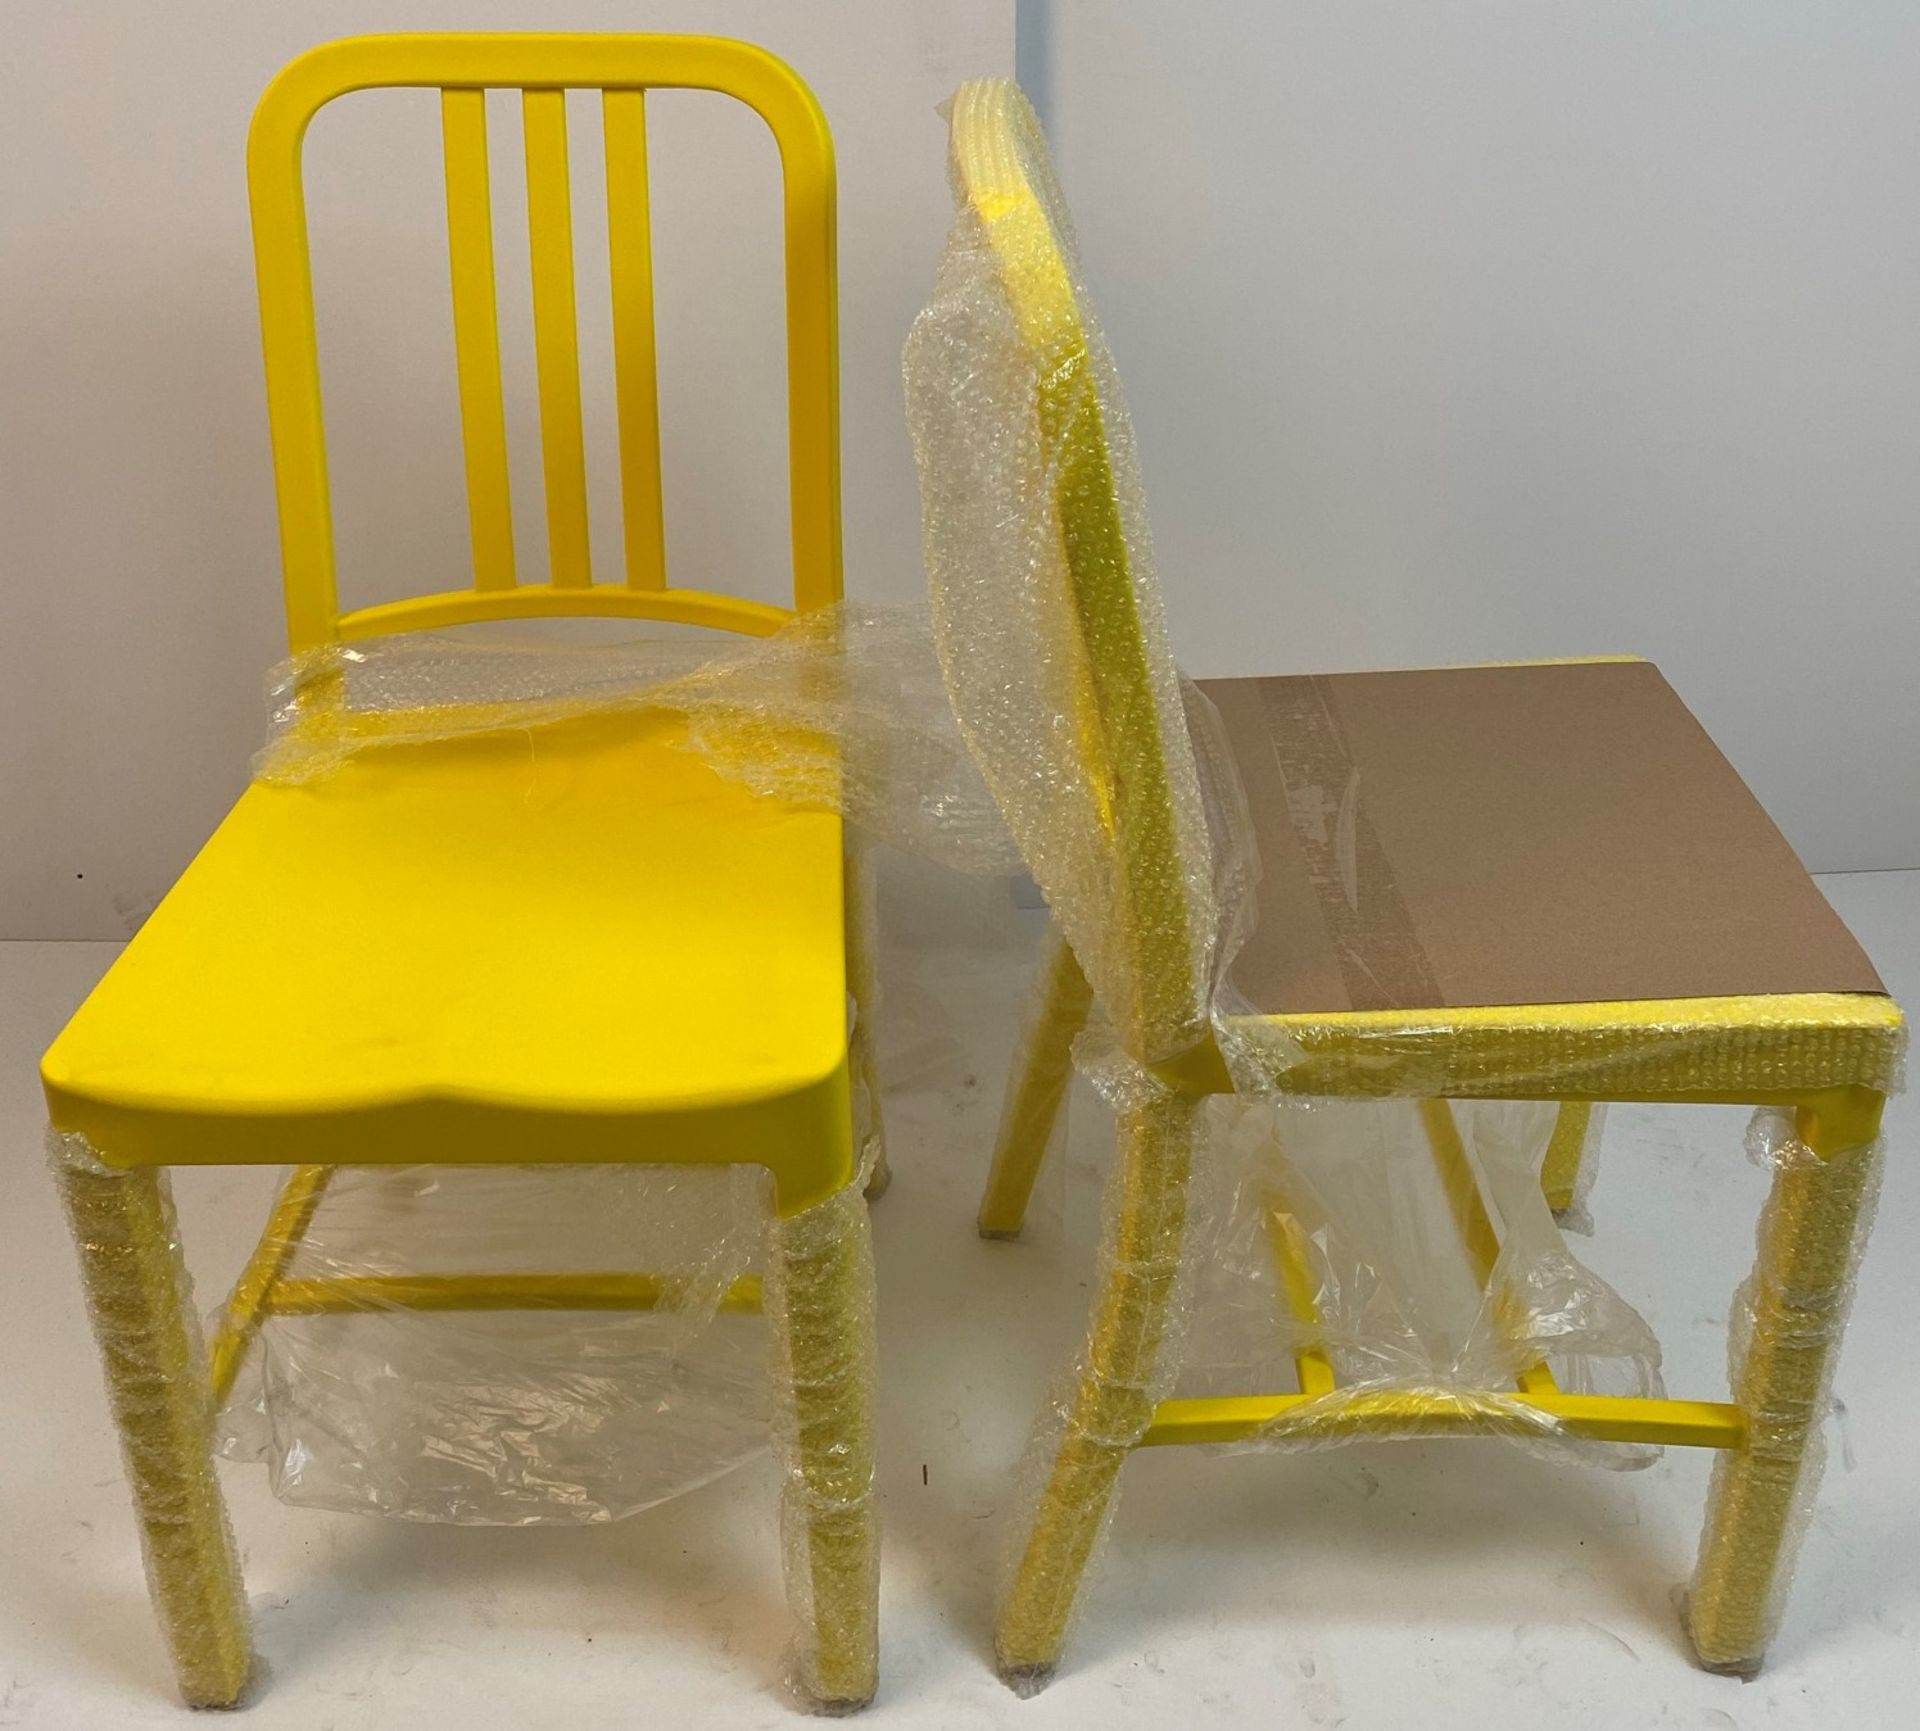 2 x Dining Chairs UK Ltd - PP Navy Chairs - Yellow Plastic Dining Chairs